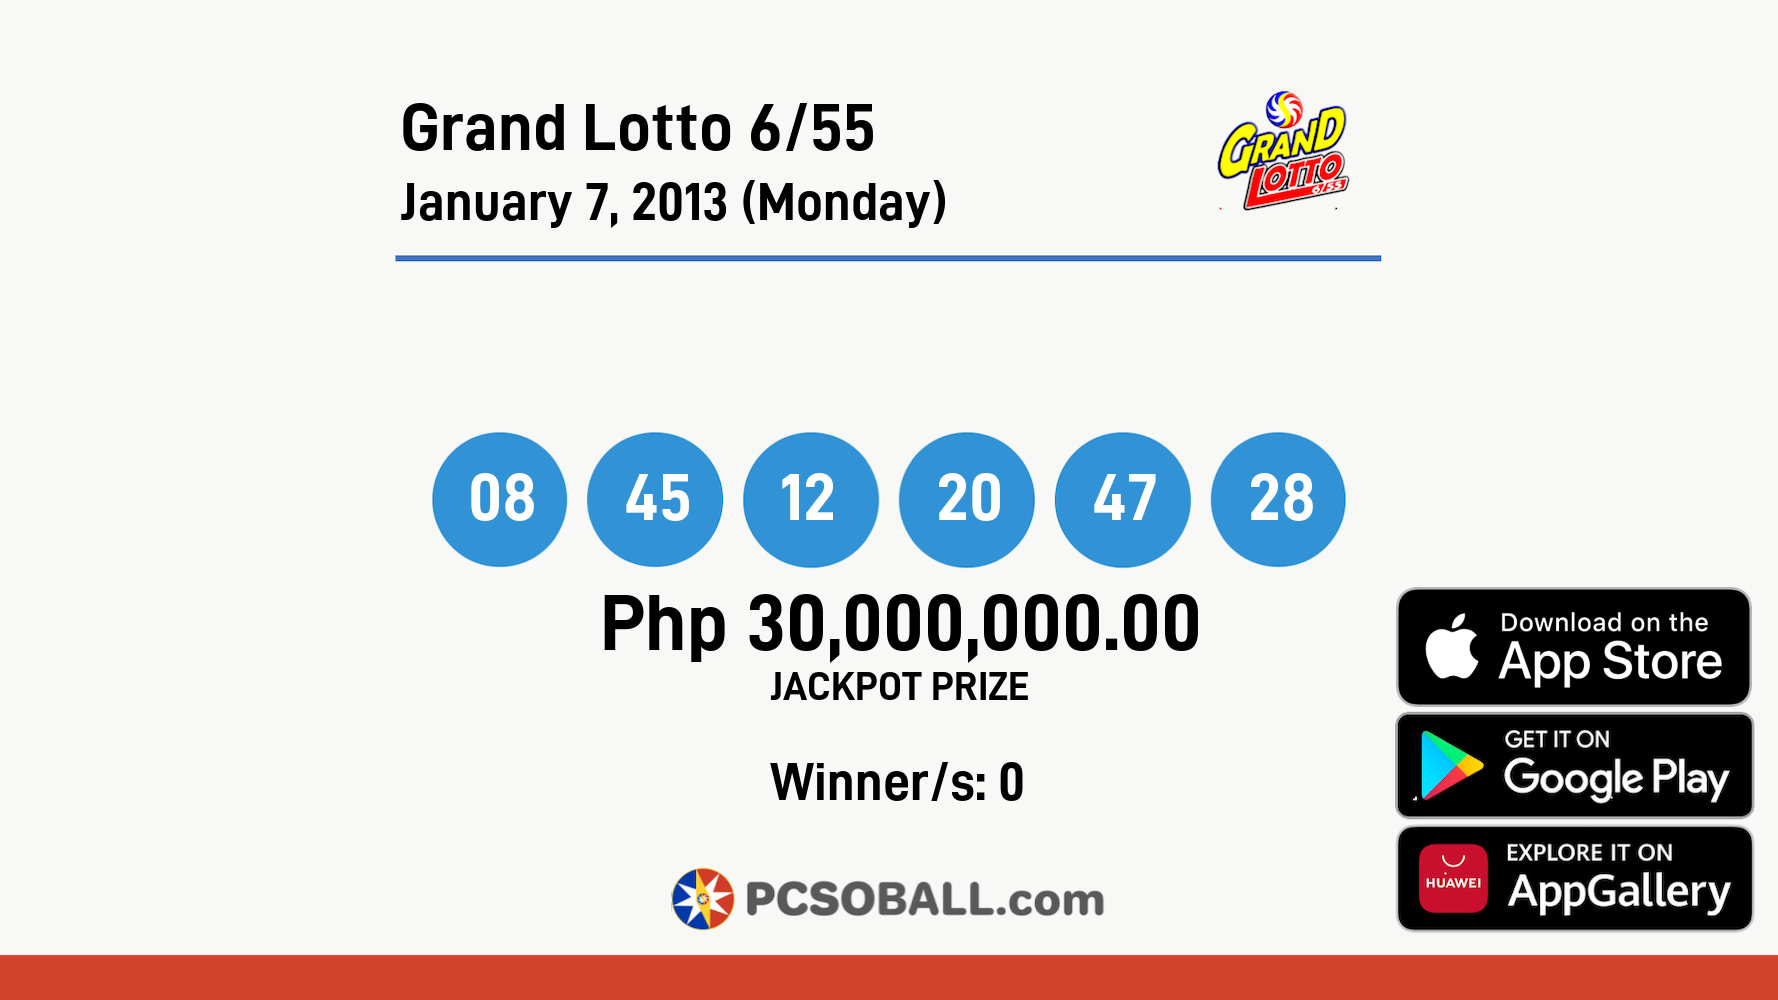 Grand Lotto 6/55 January 7, 2013 (Monday) Result